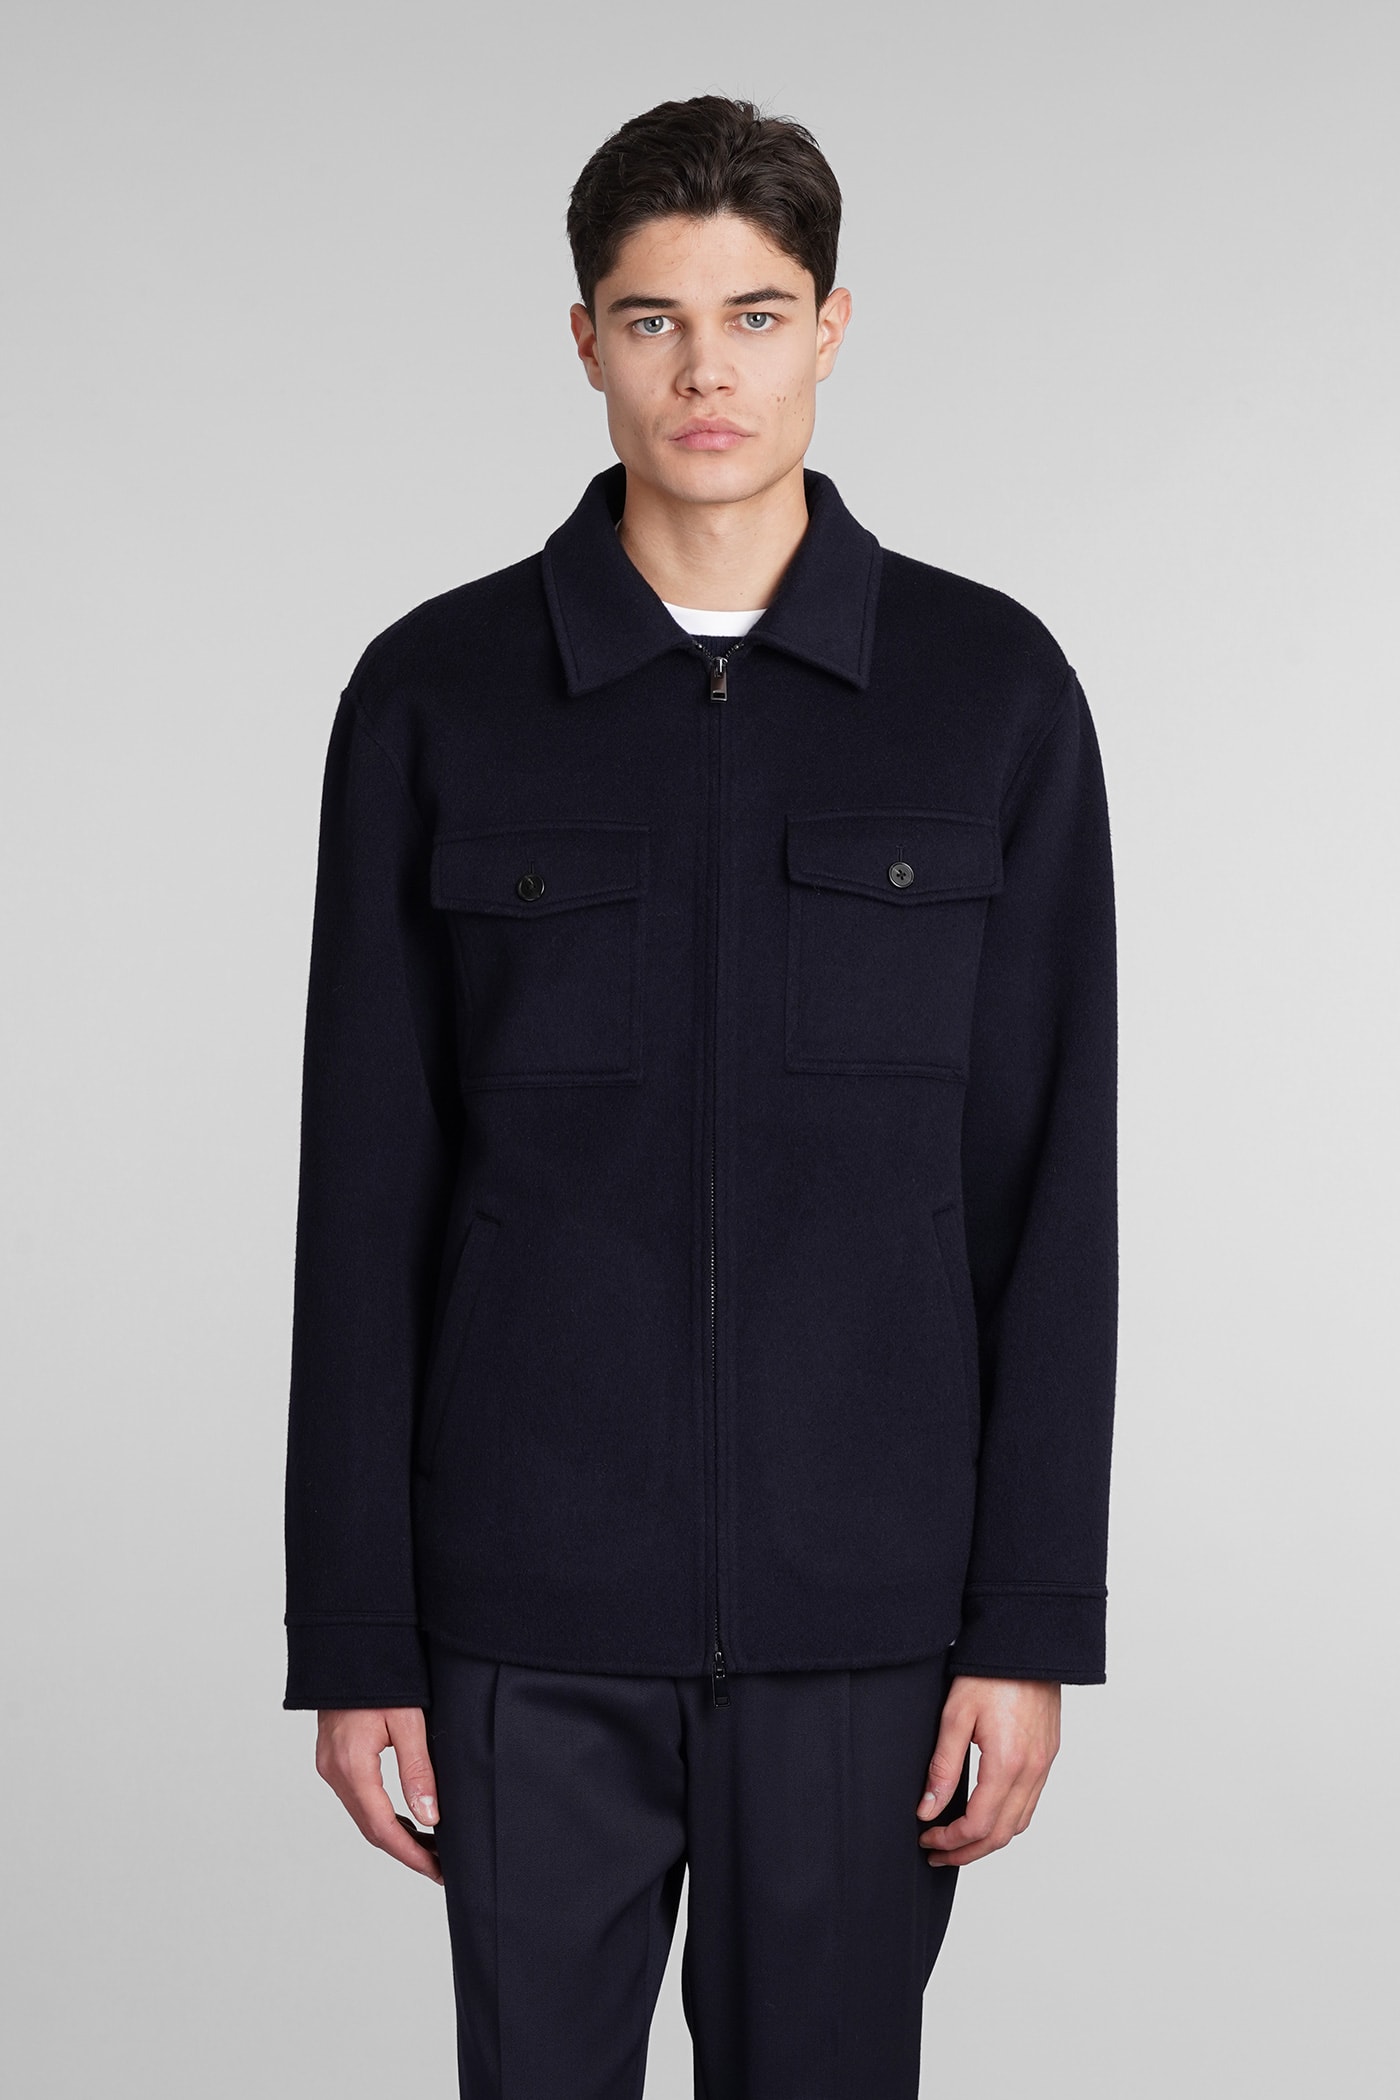 THEORY CASUAL JACKET IN BLUE WOOL